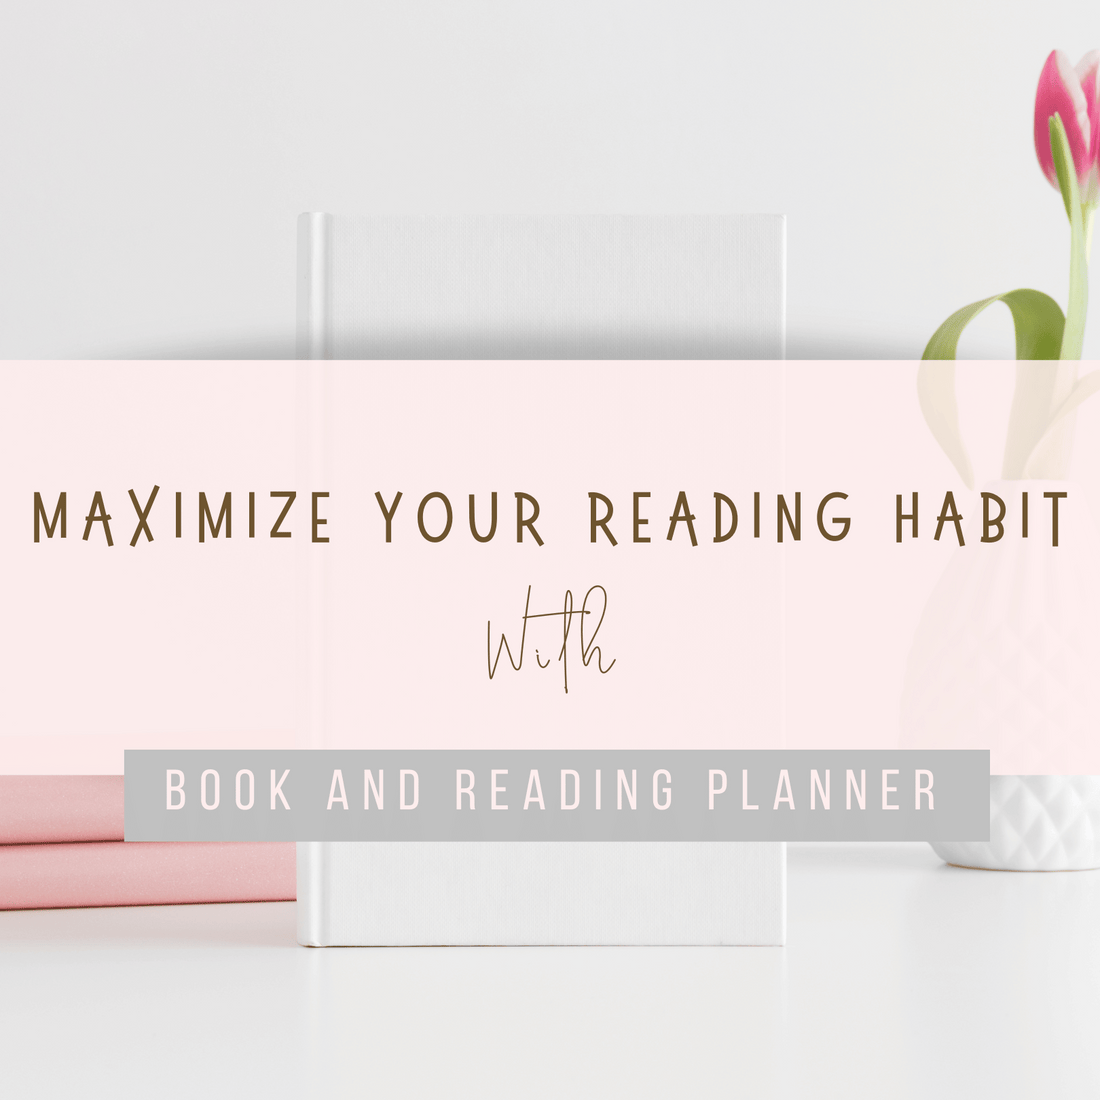 Maximize Your Reading Habits with Book & Reading Planner